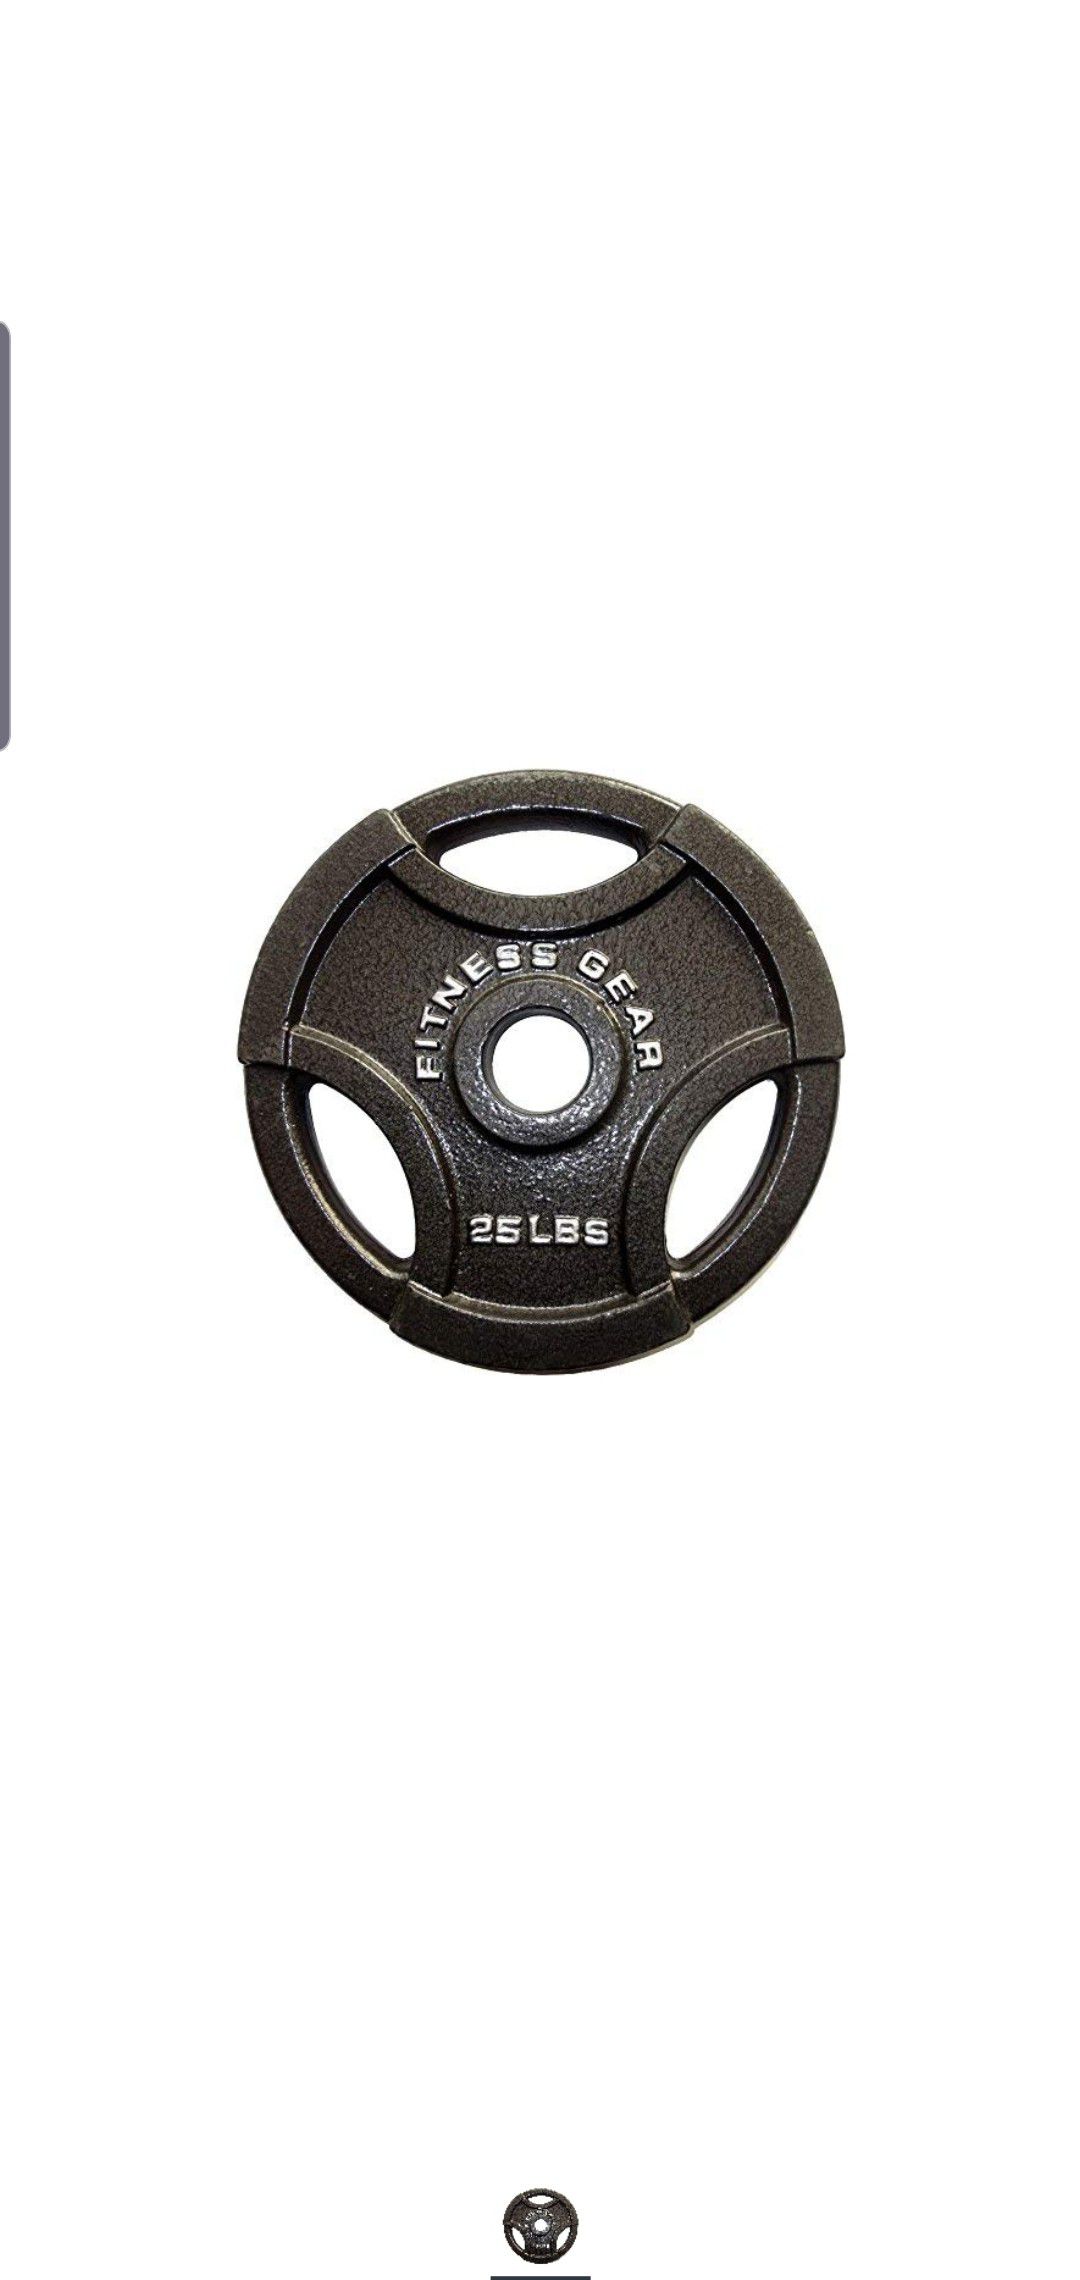 Fitness gear weights